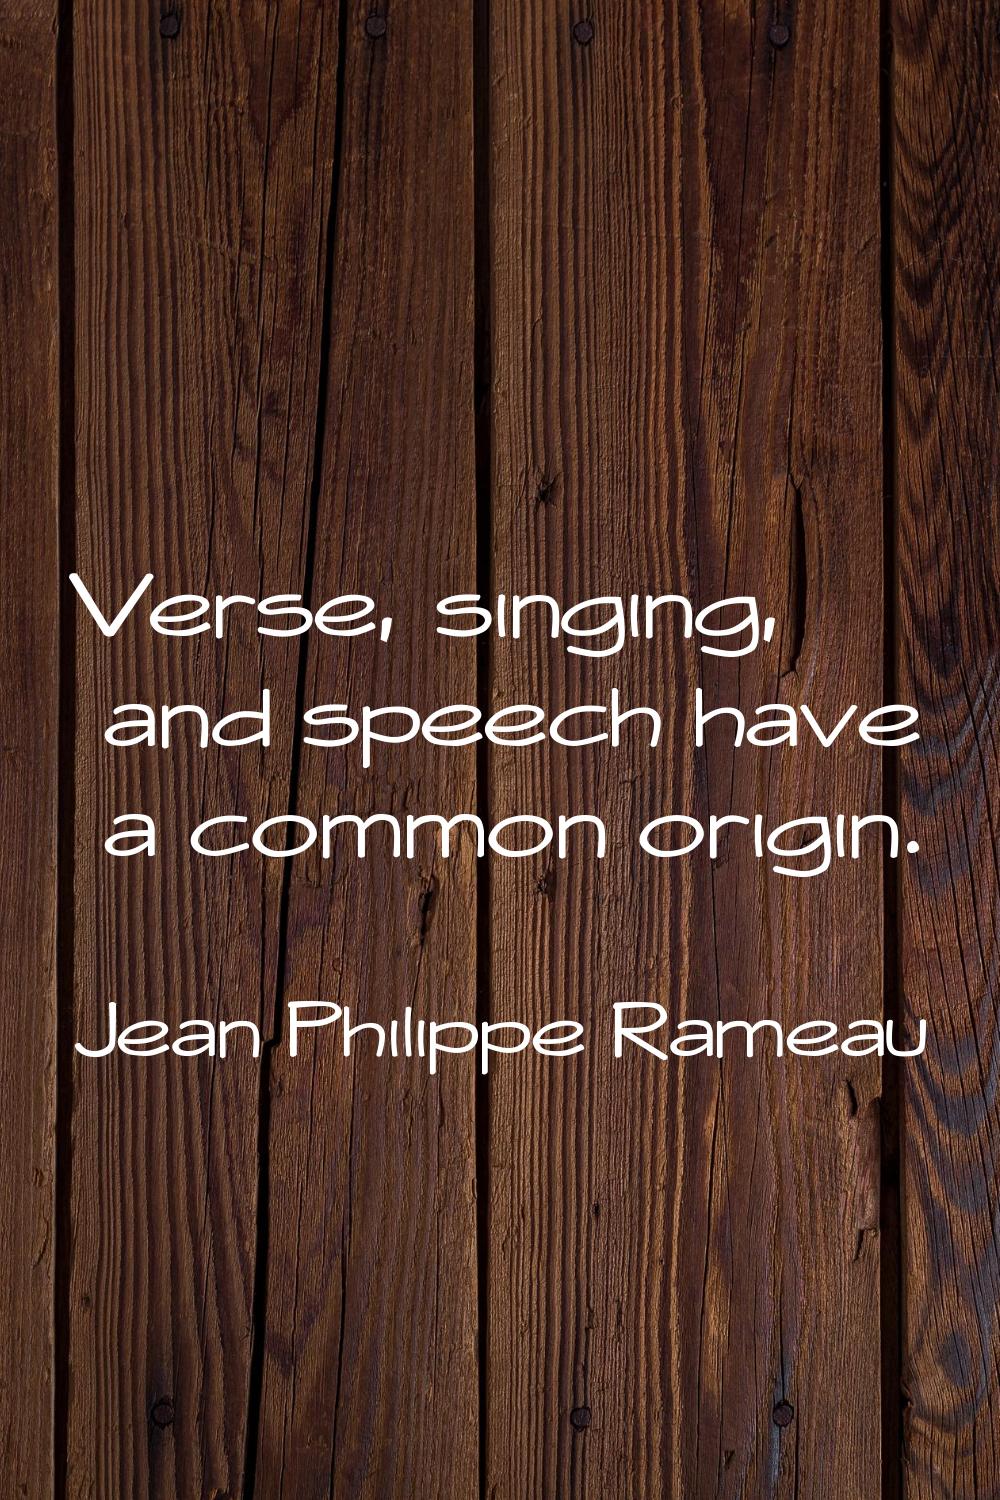 Verse, singing, and speech have a common origin.